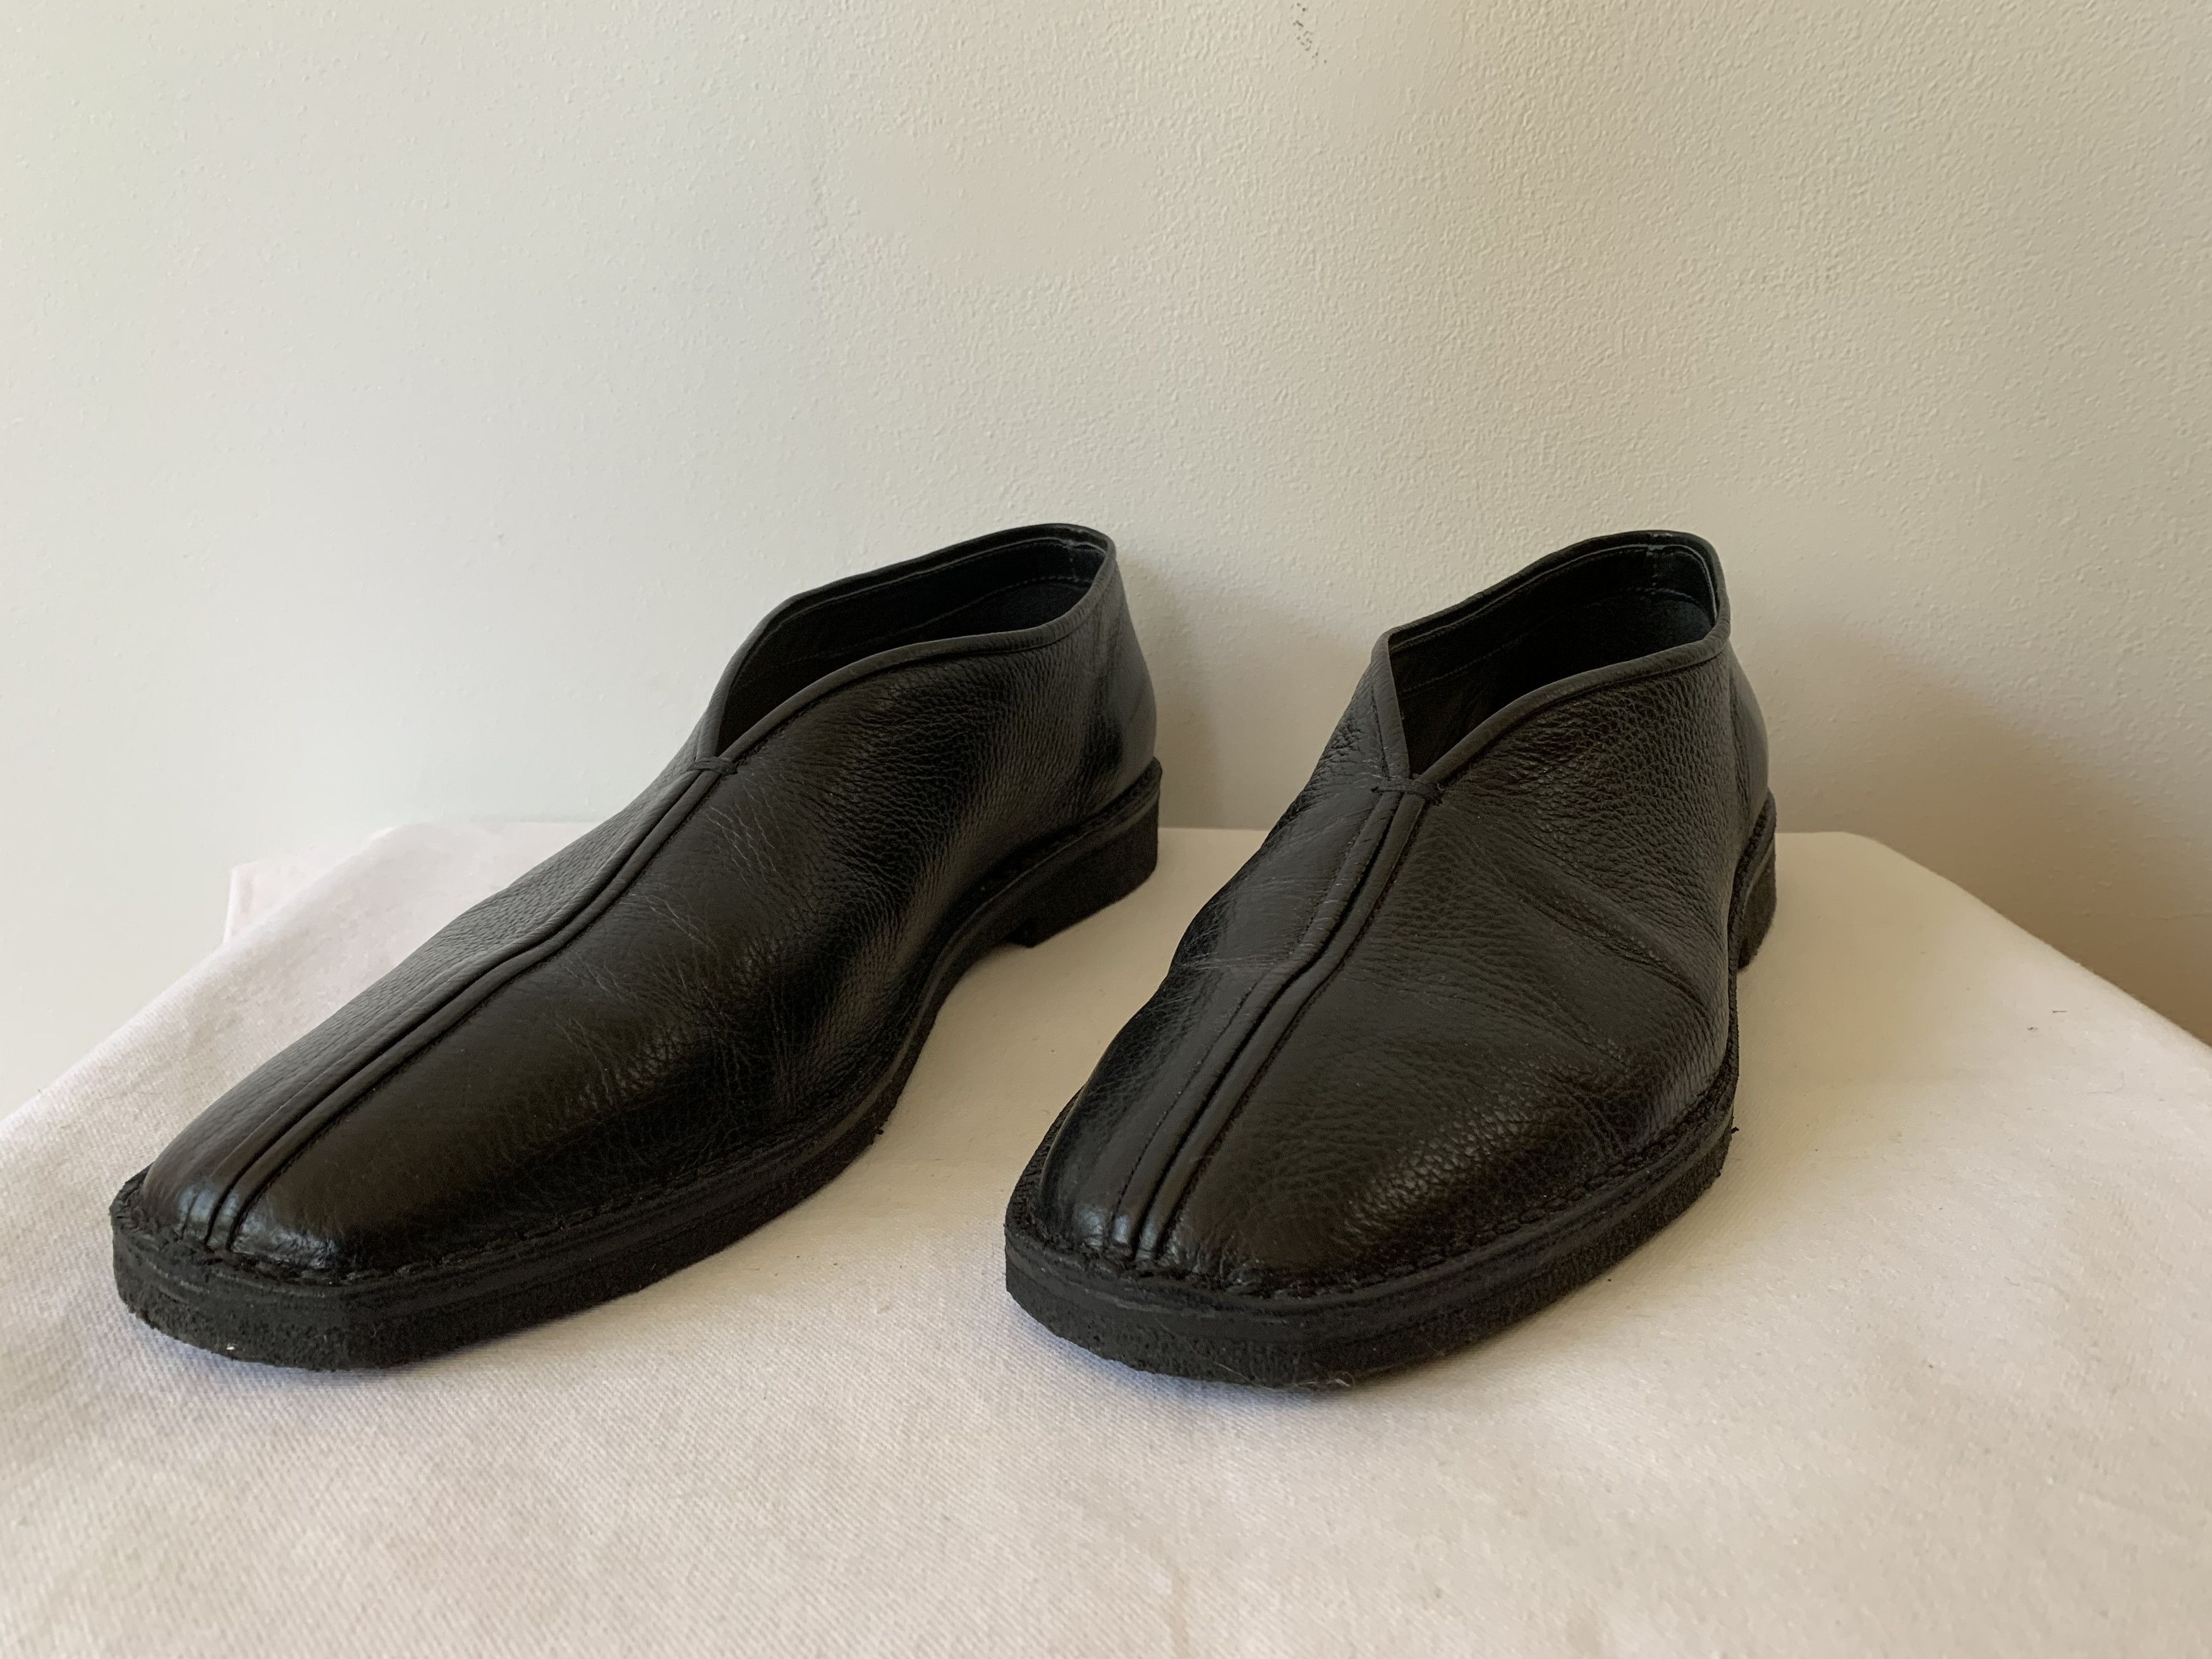 Lemaire Lemaire Chinese Slippers Black Leather Loafers Sz 45 Size US 12 / EU 45 - 3 Thumbnail